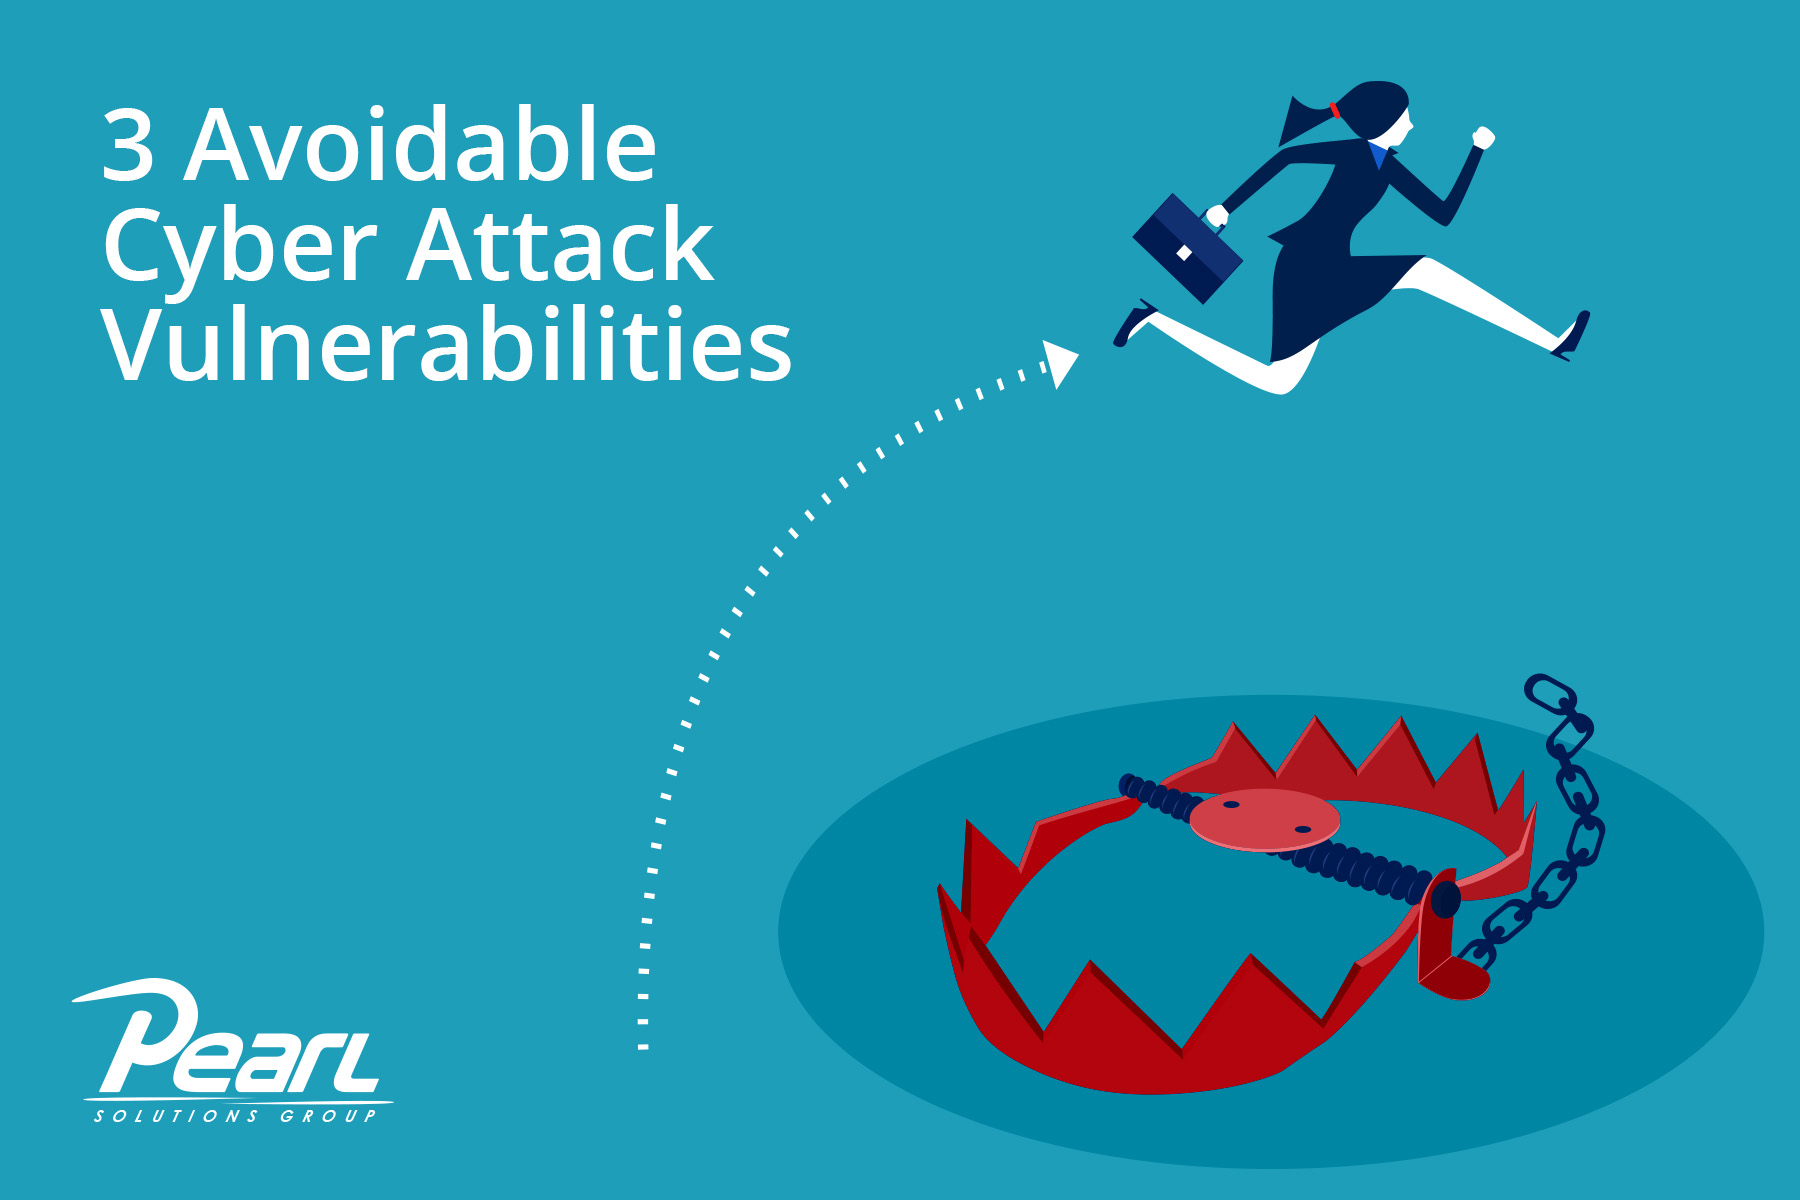 3 Avoidable Cyber Attack Vulnerabilities